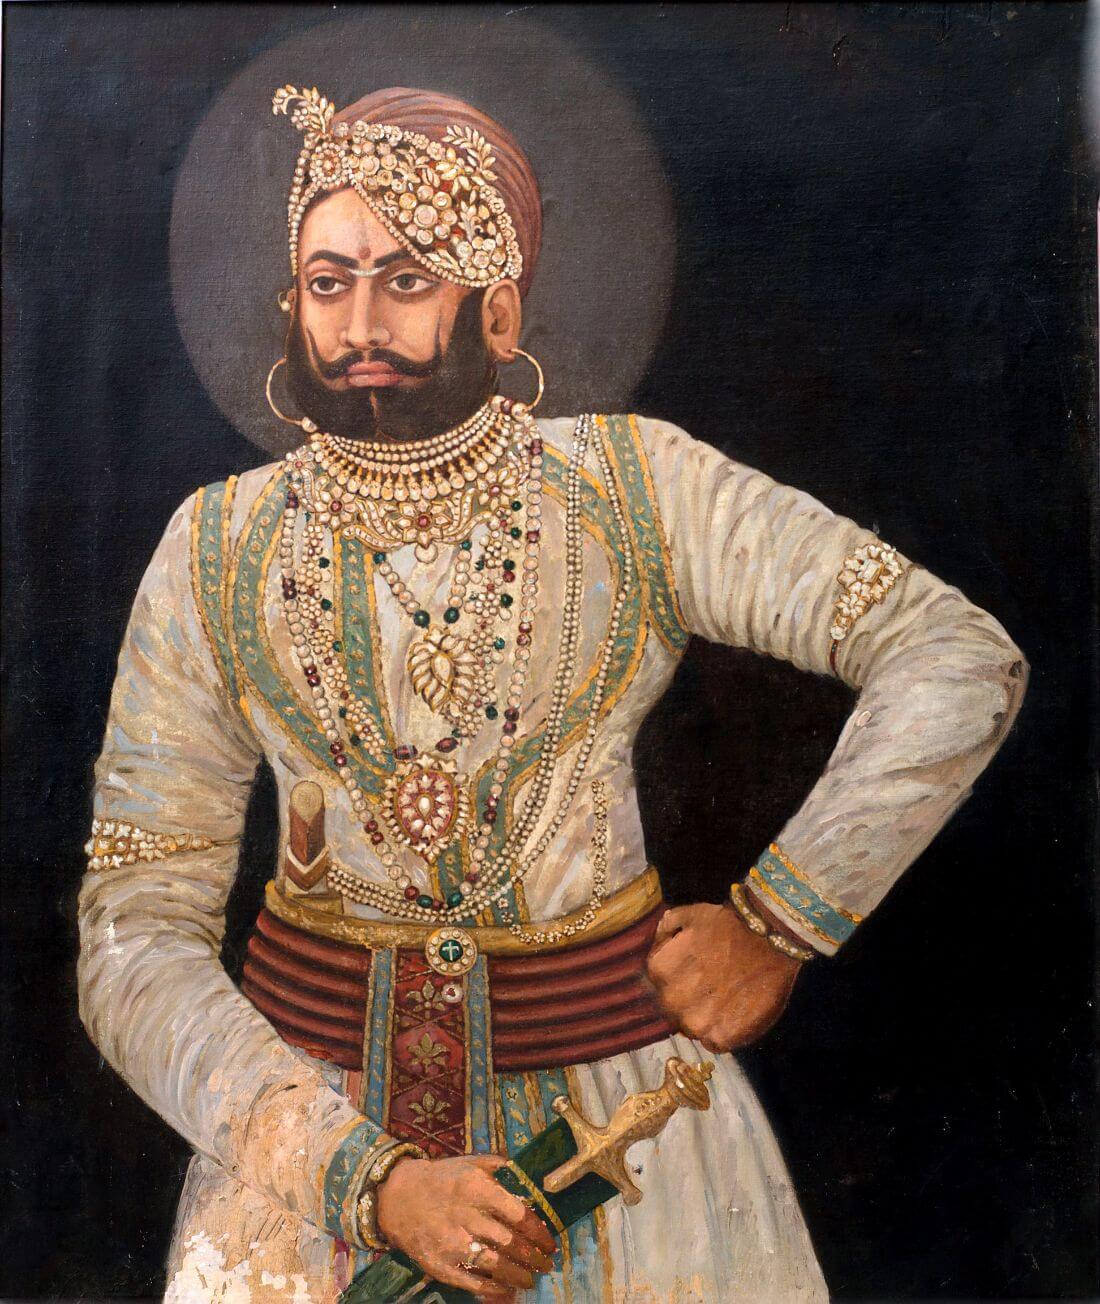 Portrait Of An Indian King - Vintage Indian Royalty Painting ...